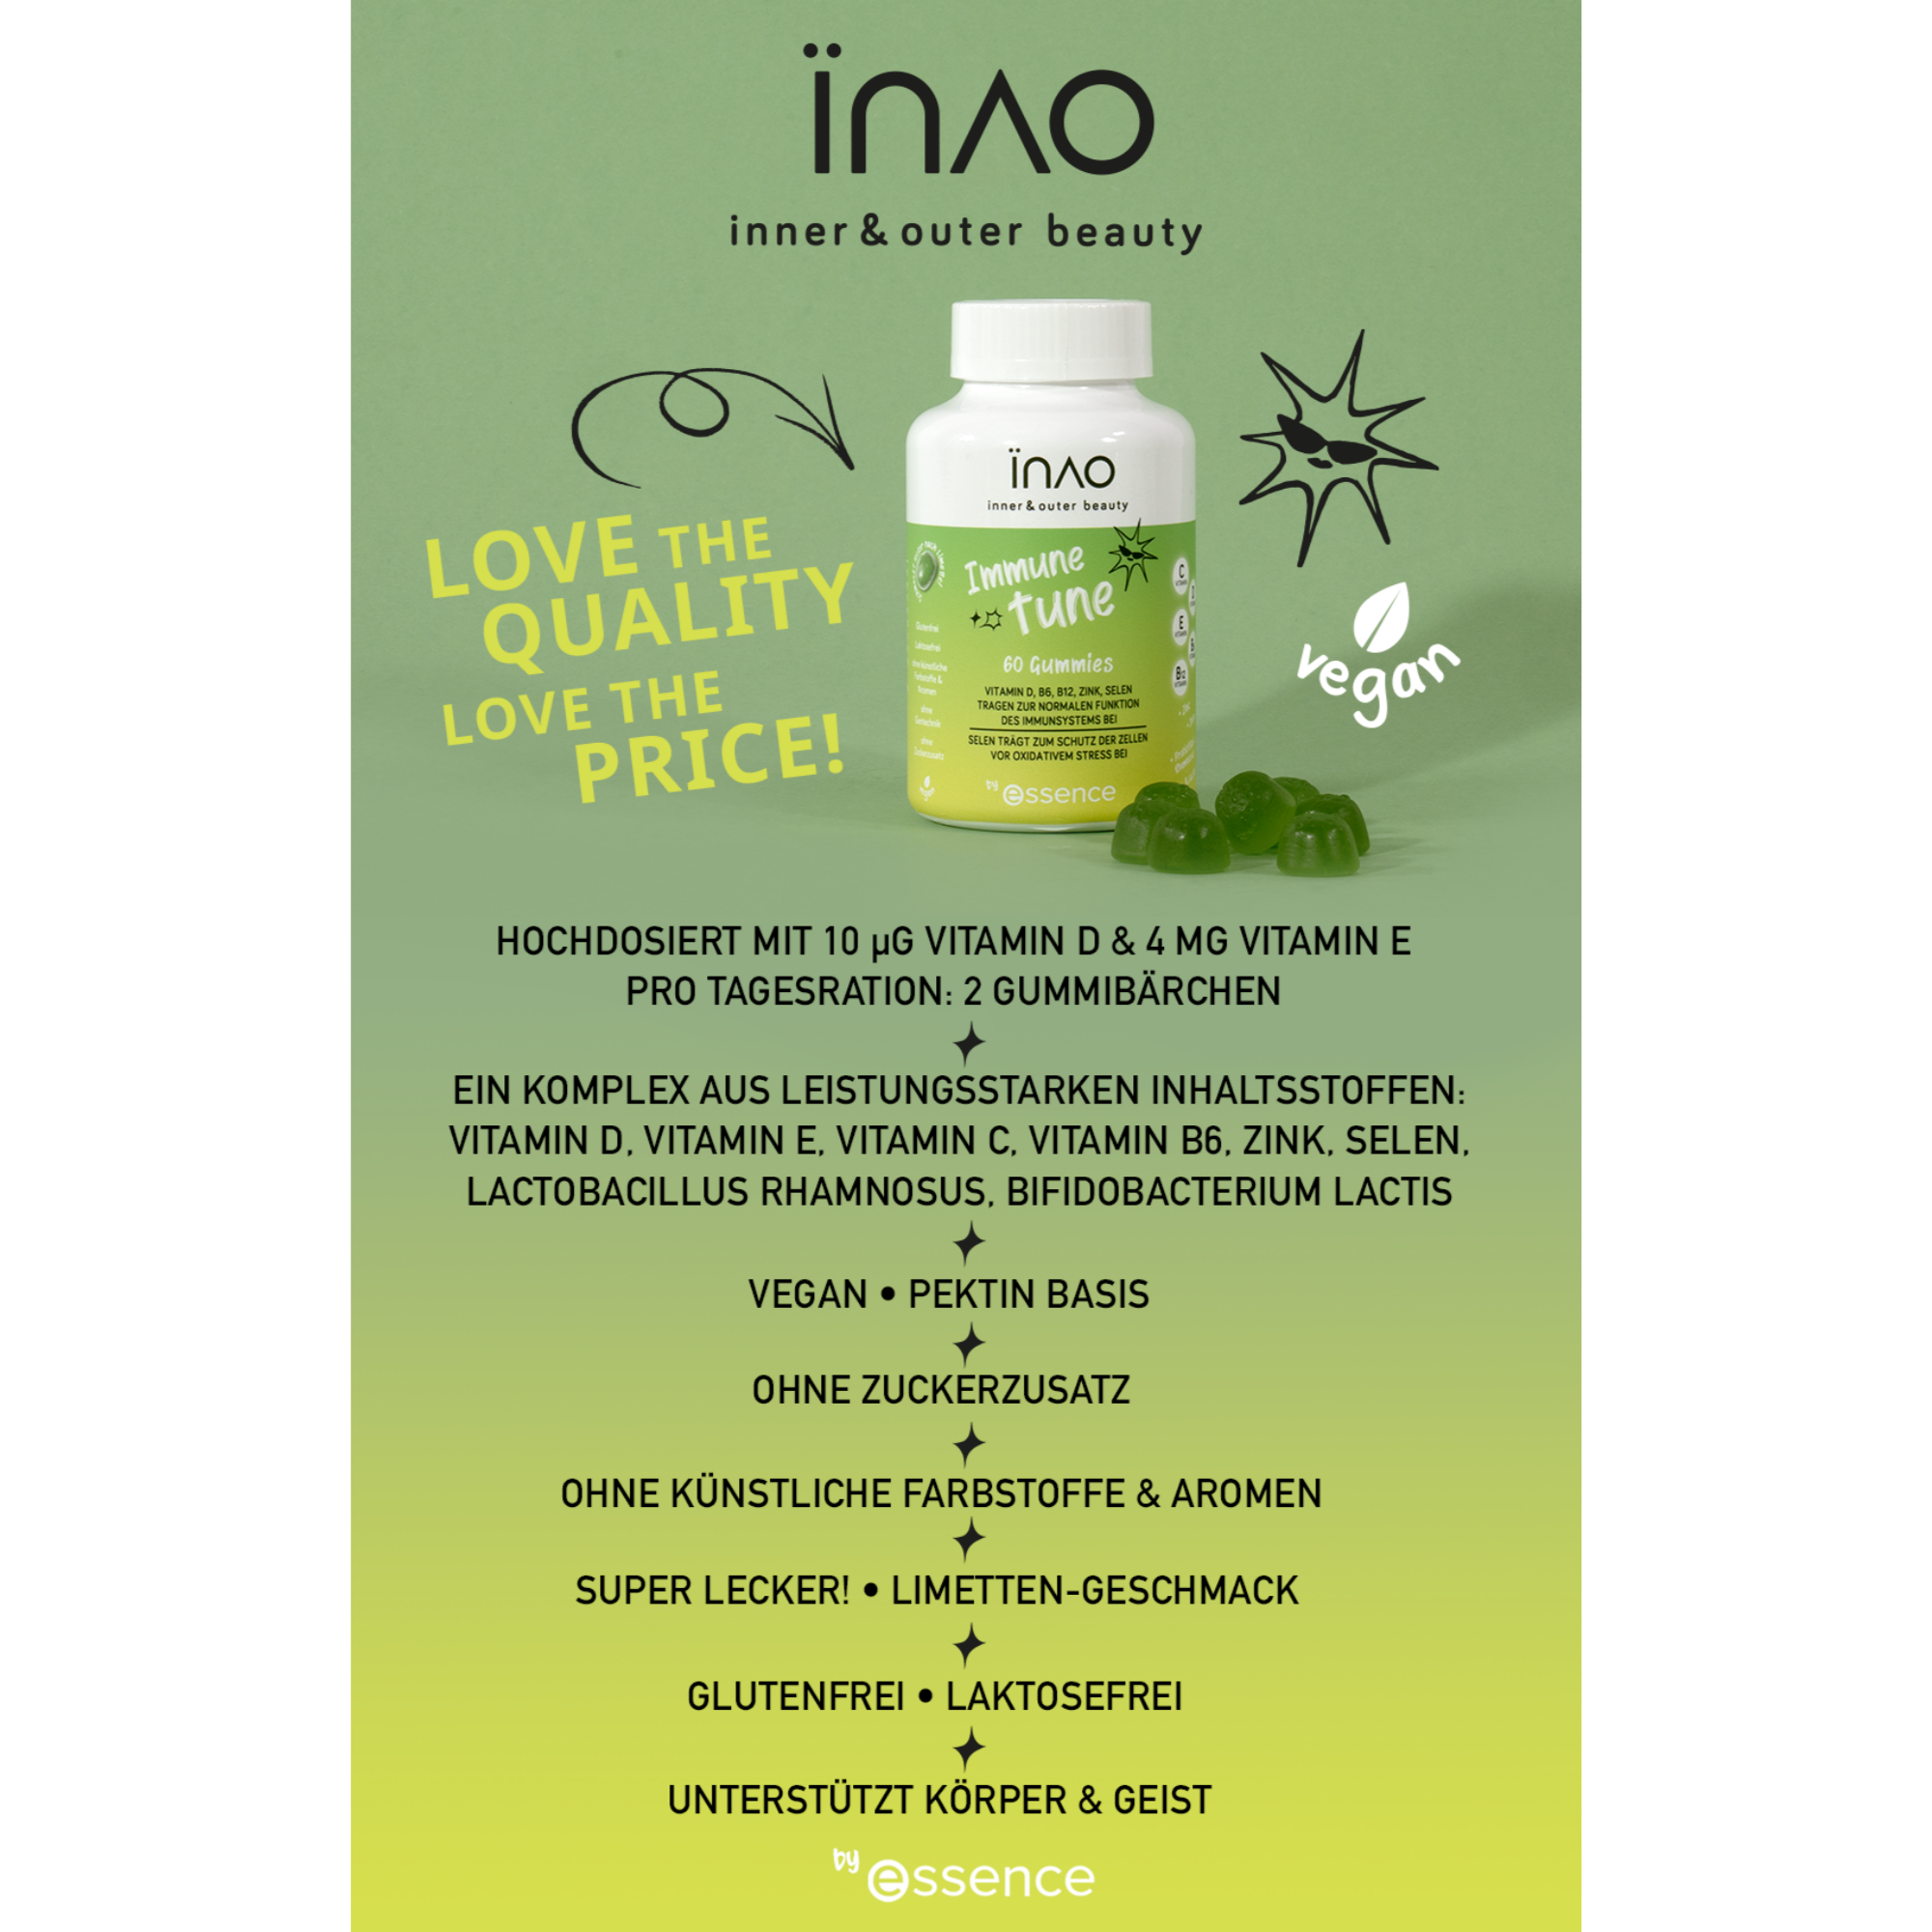 INAO inner and outer beauty Immune Tune gummies by essence